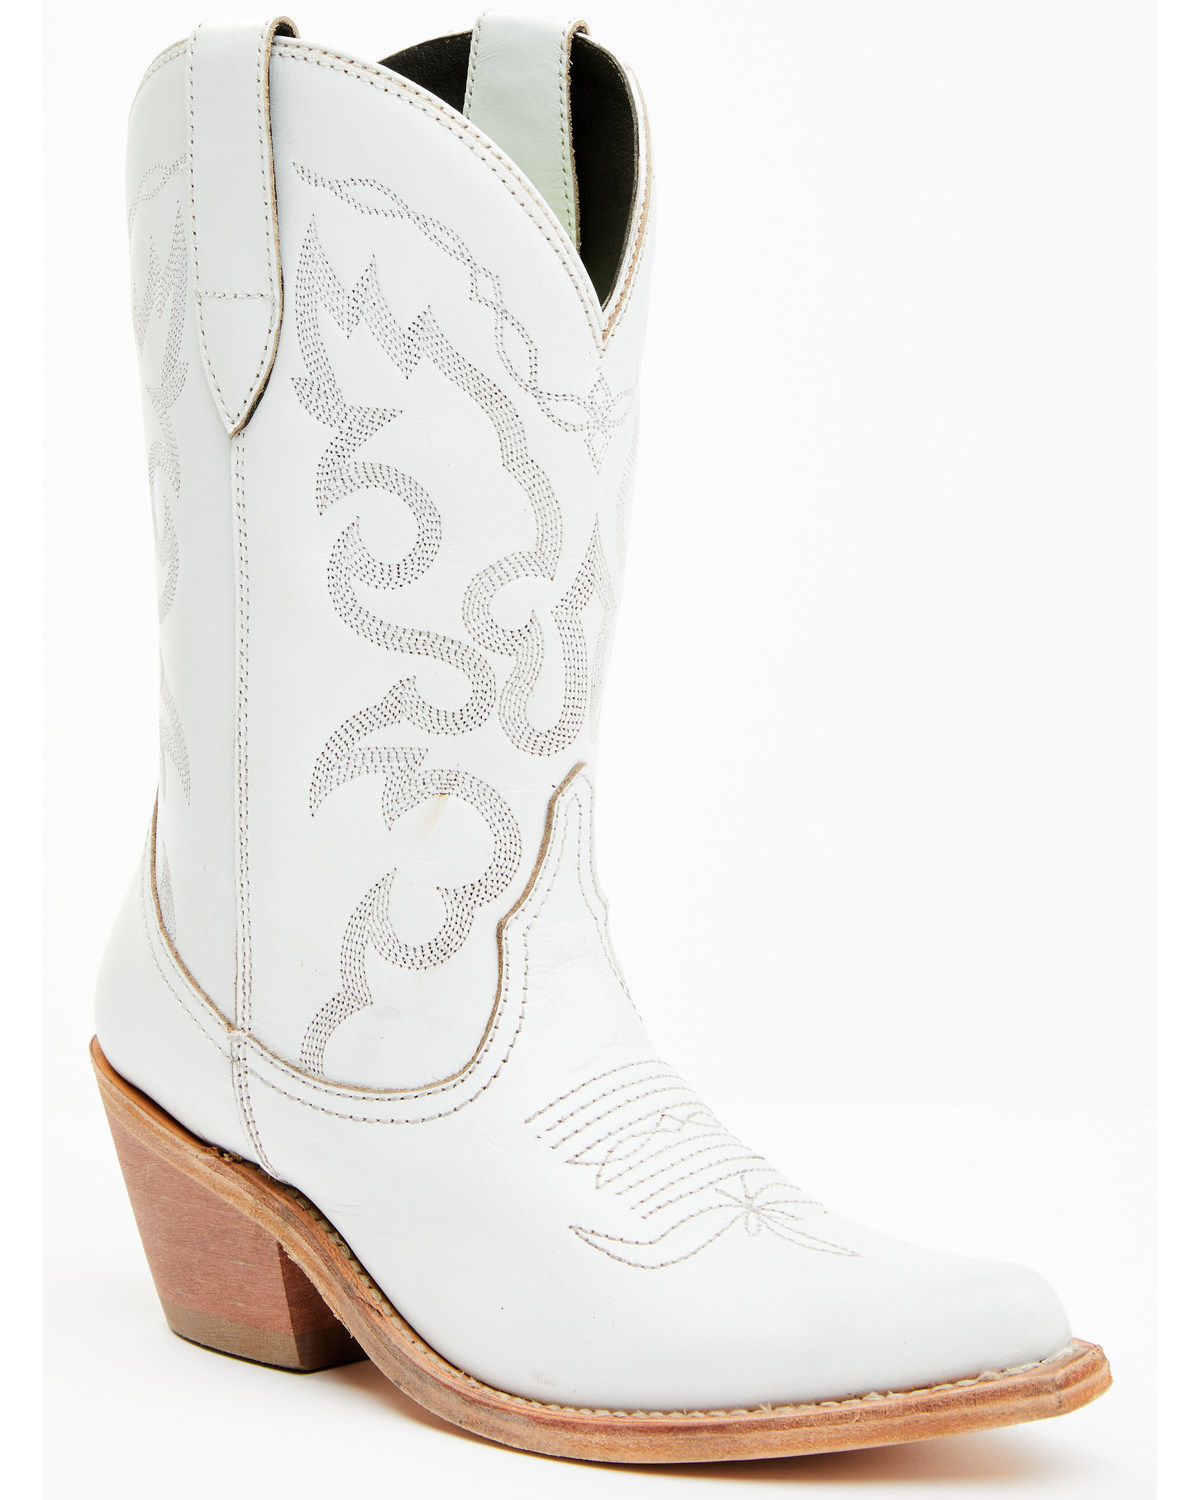 Caborca Silver by Liberty Black Women's Sienna Western Boots - Snip Toe